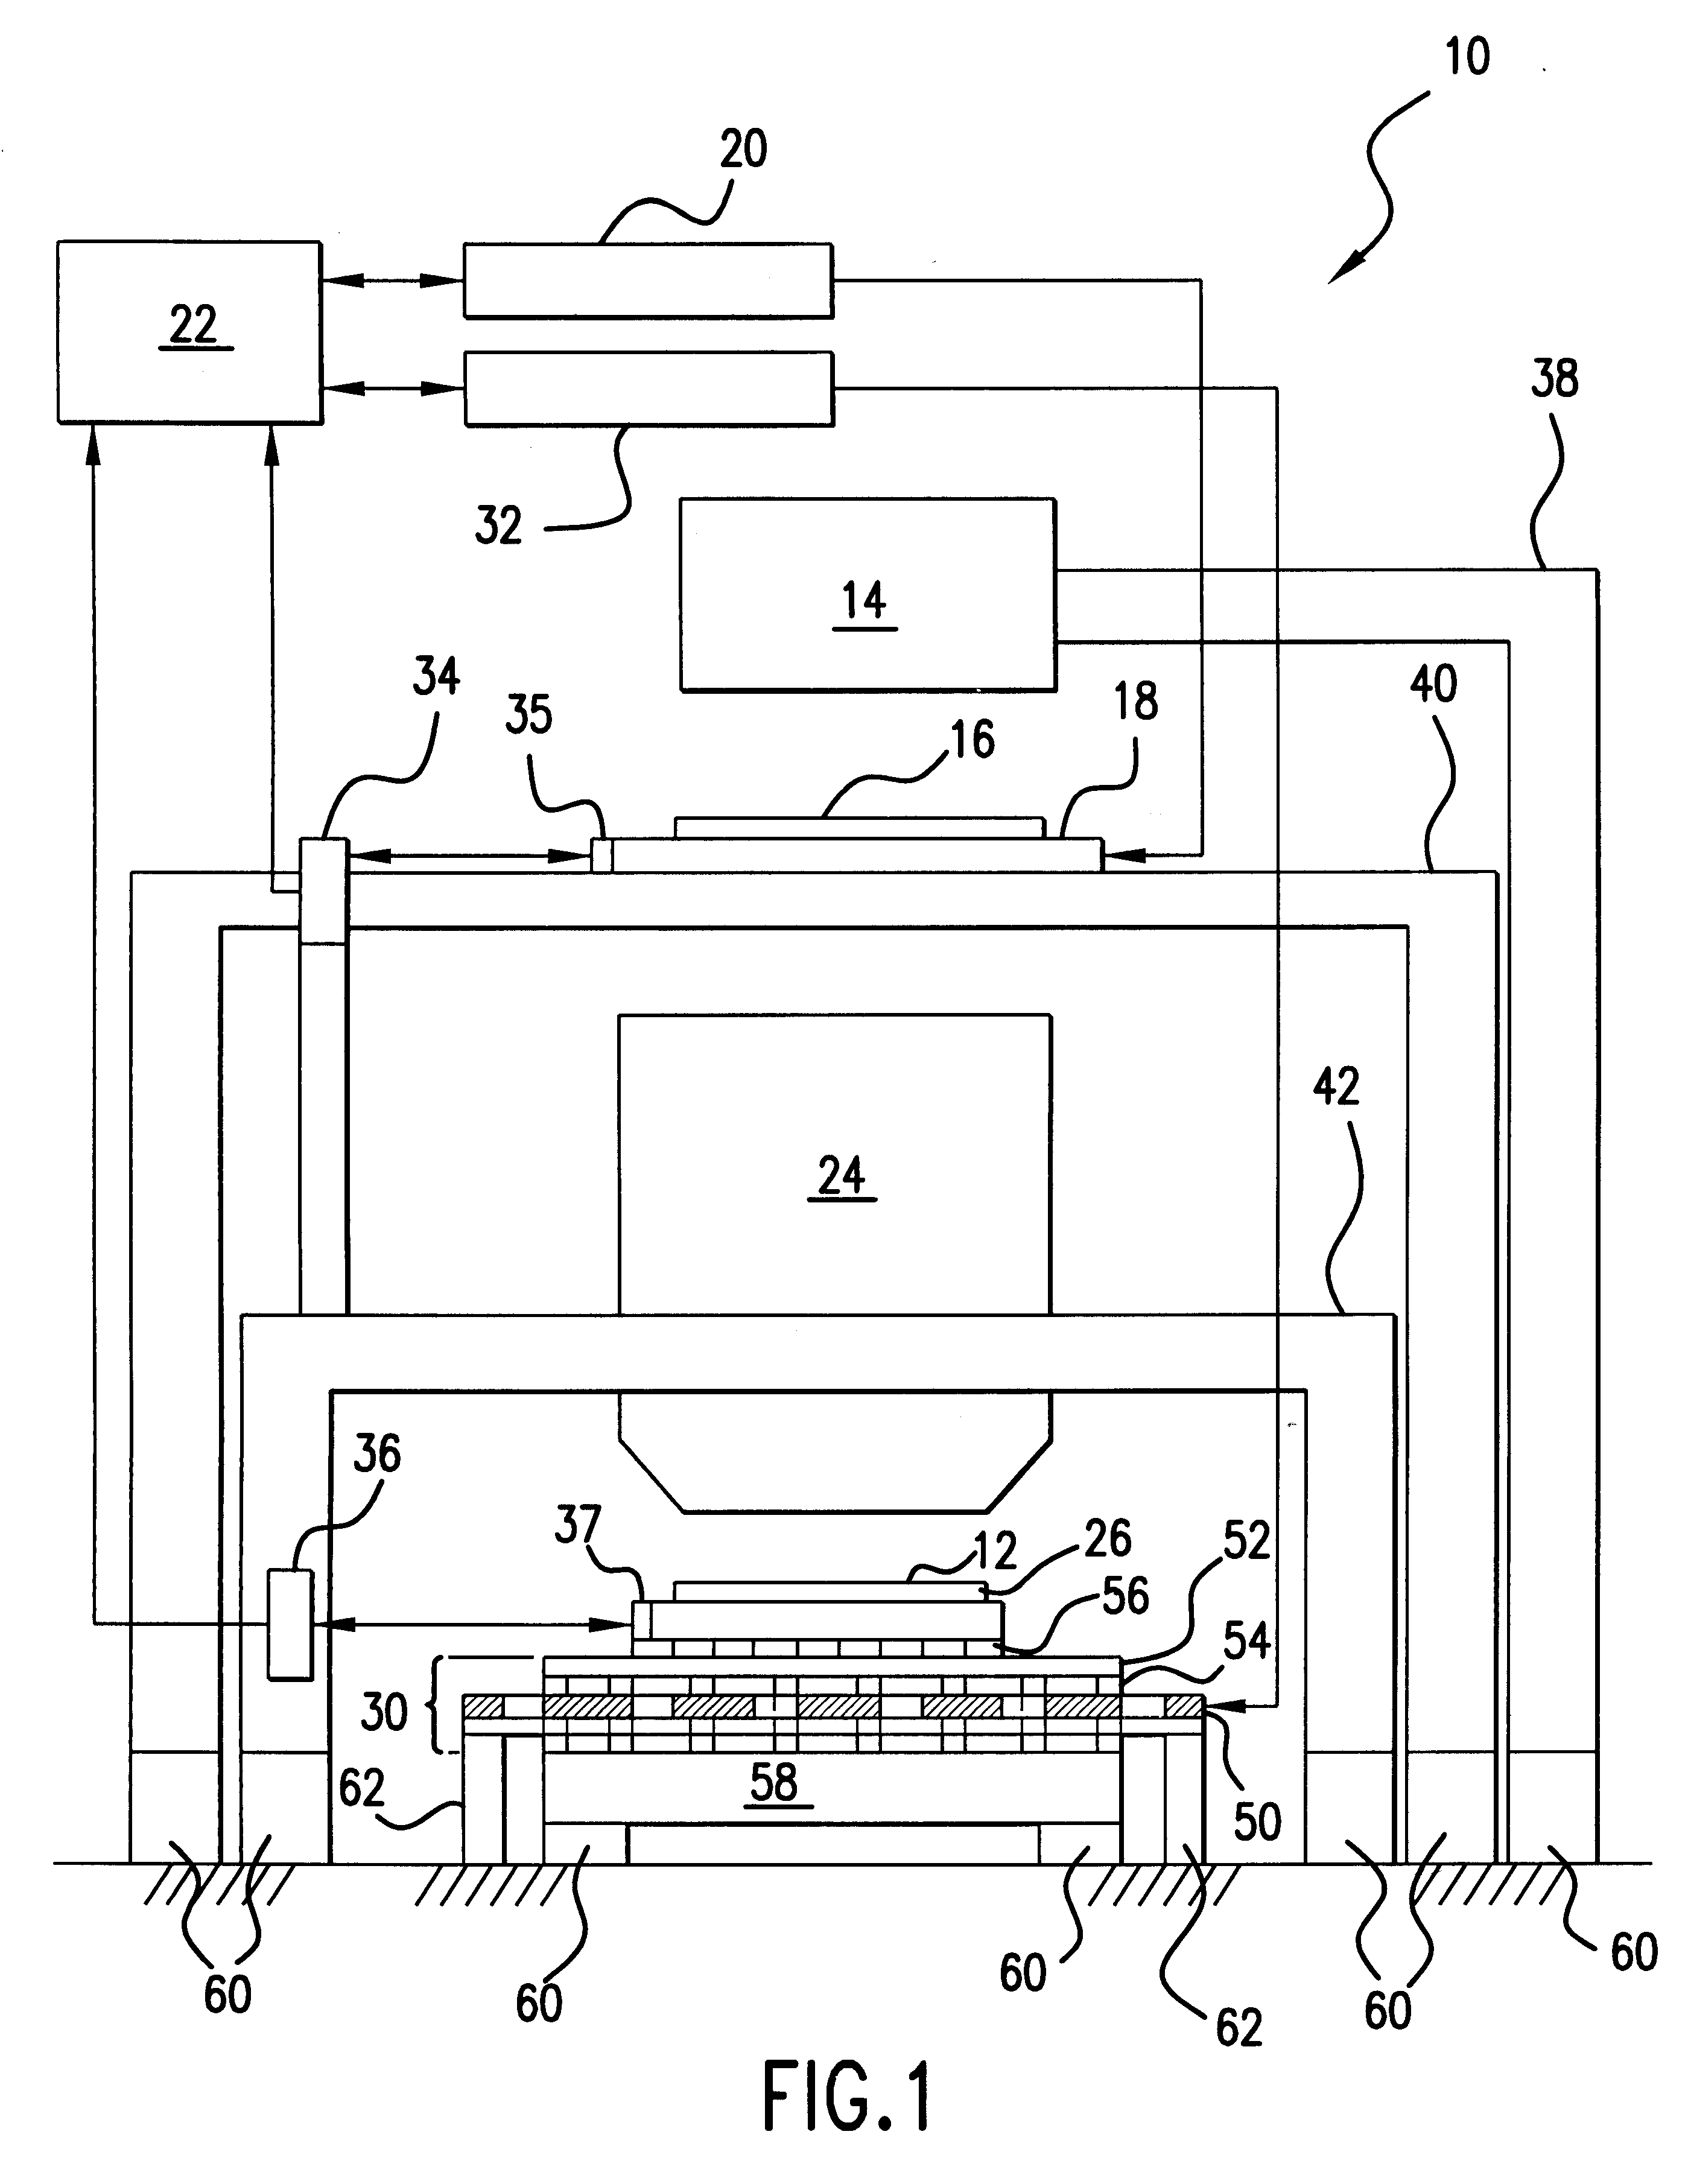 Reaction force isolation system for a planar motor